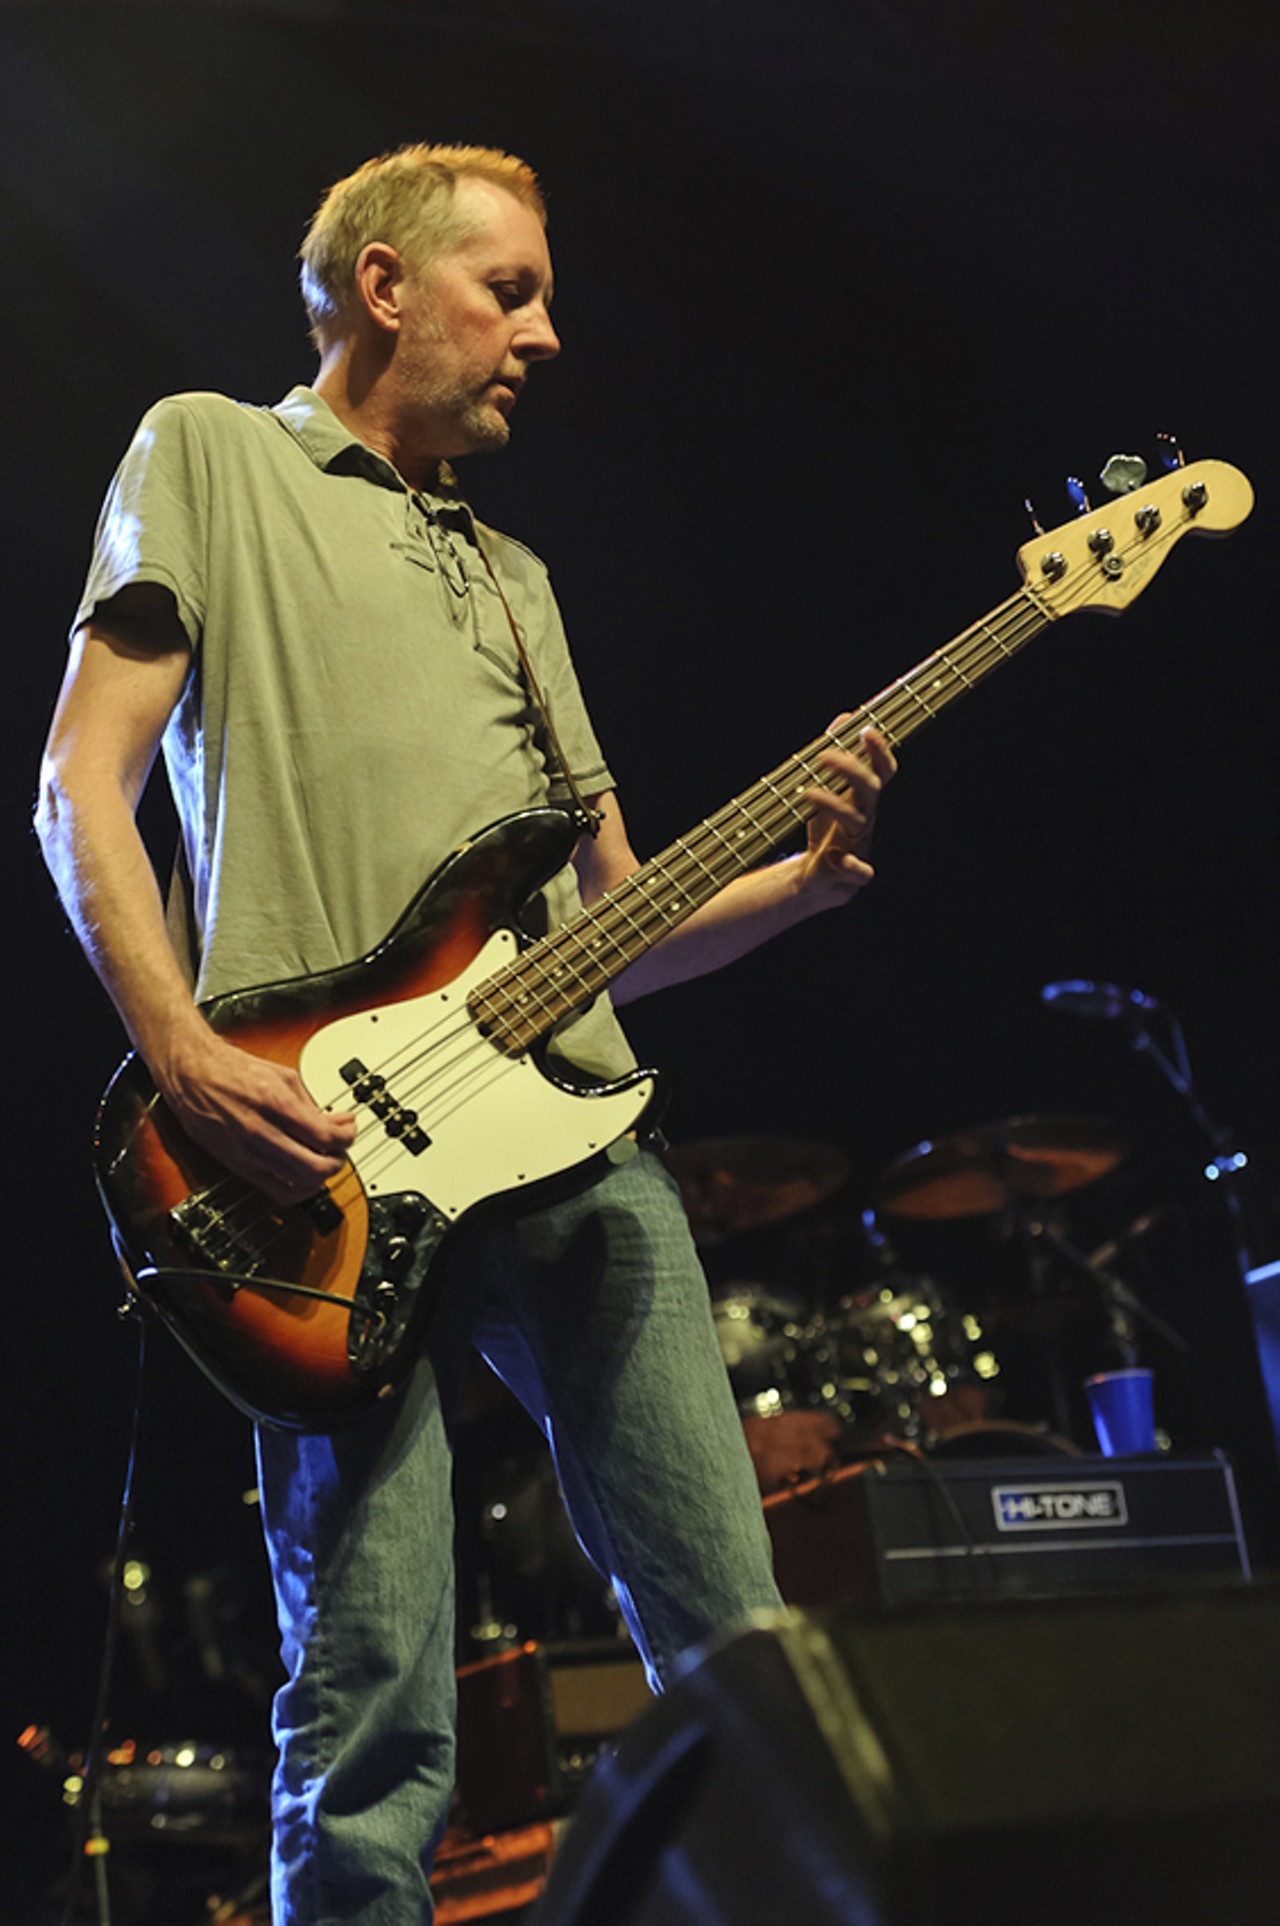 Bill Leen of Gin Blossoms, performing as part of the Summerland Tour at The Family Arena in St. Charles.